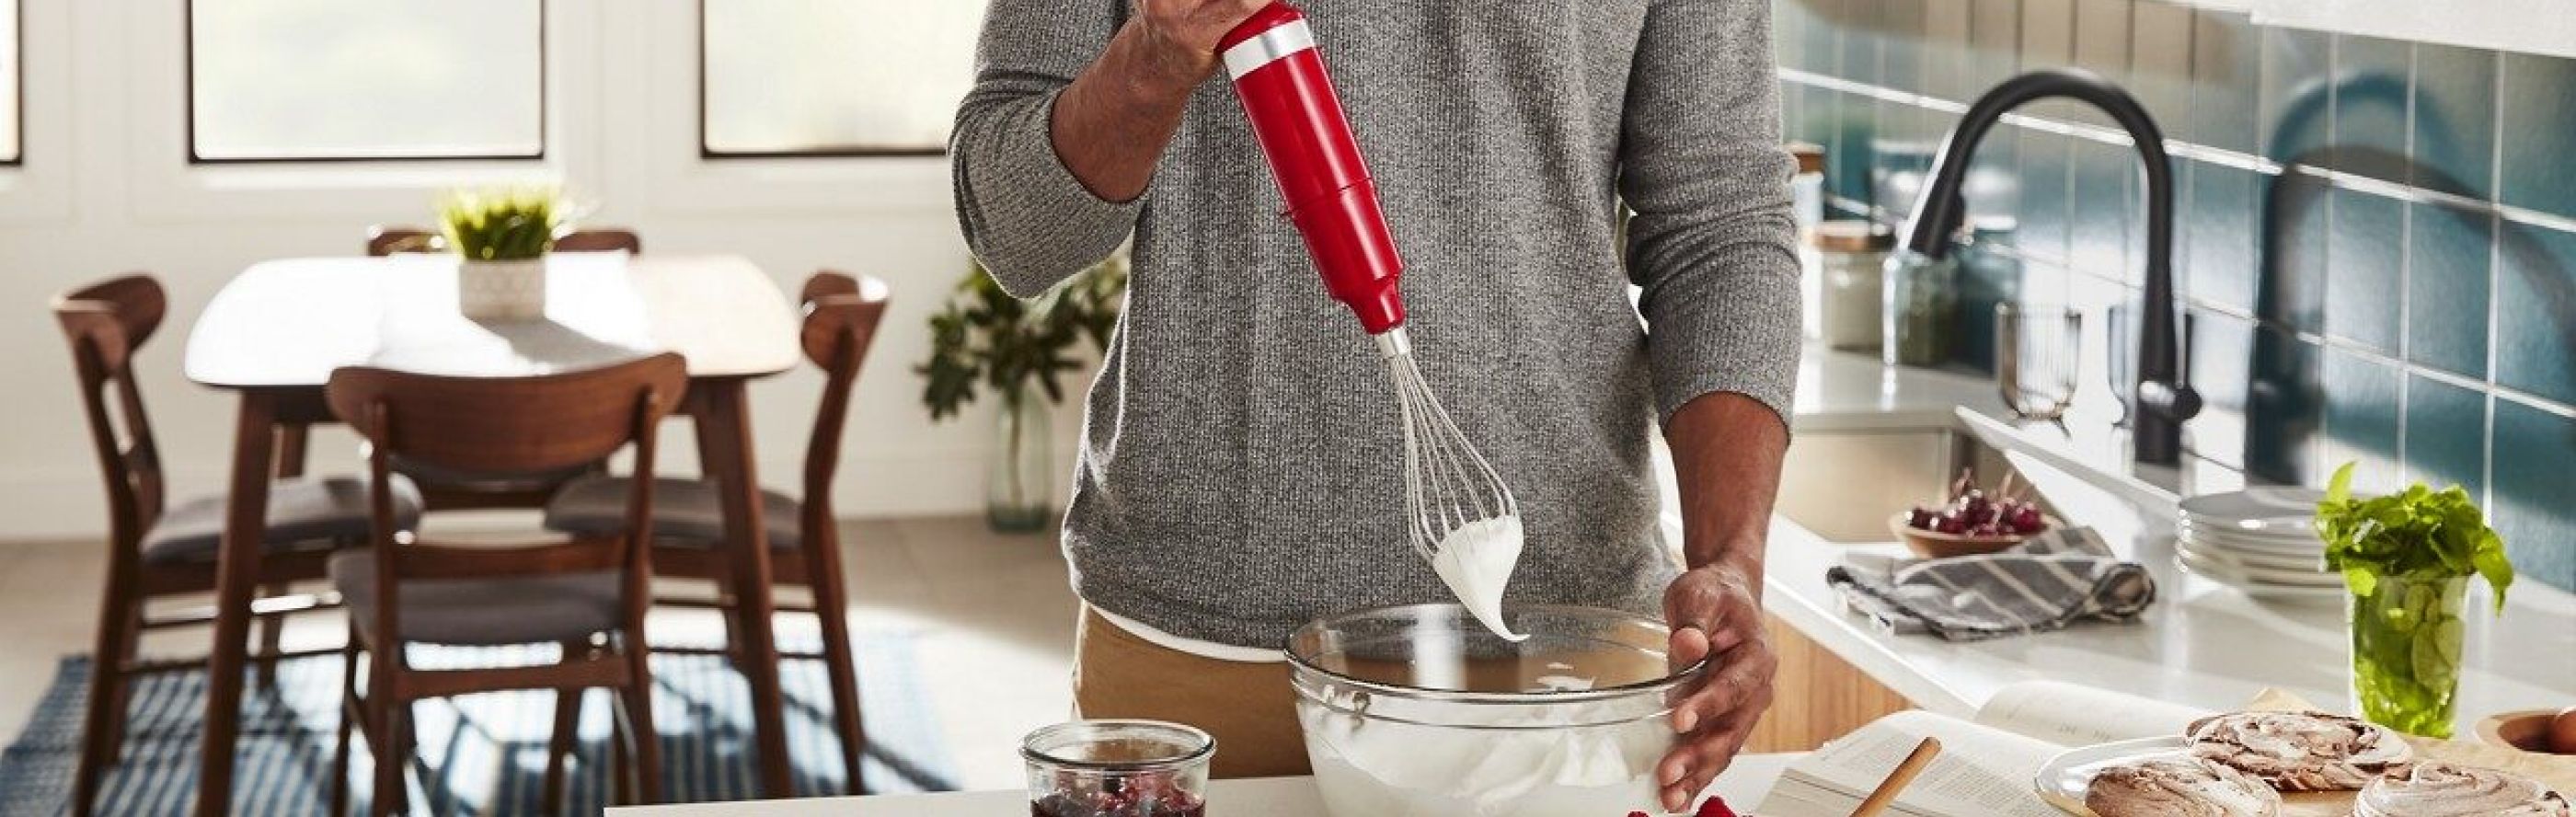 Person using red KitchenAid® immersion blender with whisk